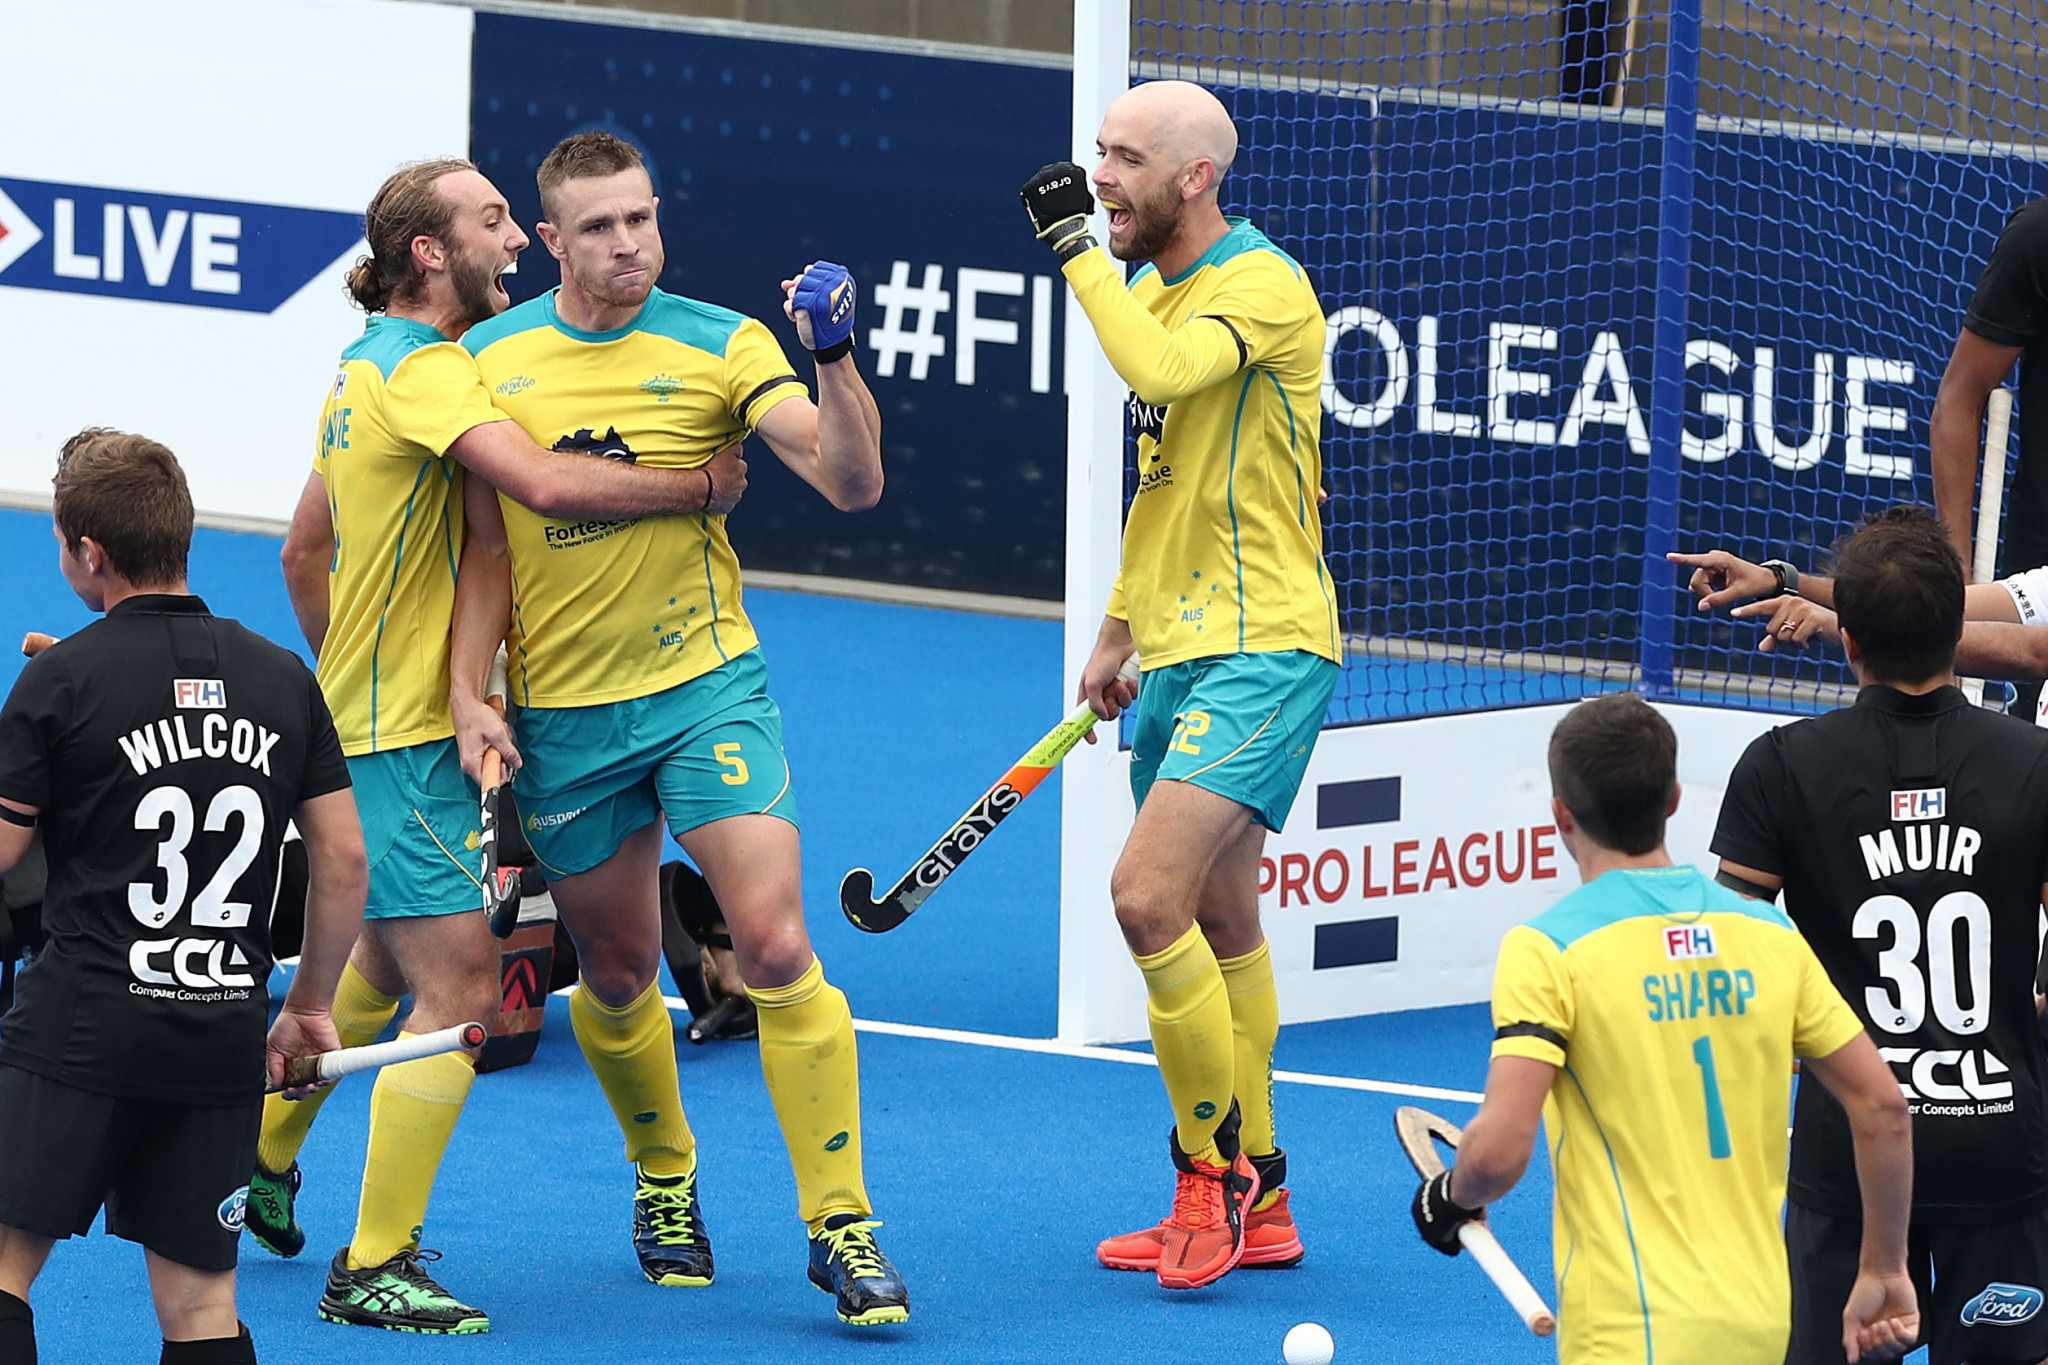 Australia's men beat New Zealand 5-1 to increase their lead at the top of the FIH Pro League standings ©Getty Images